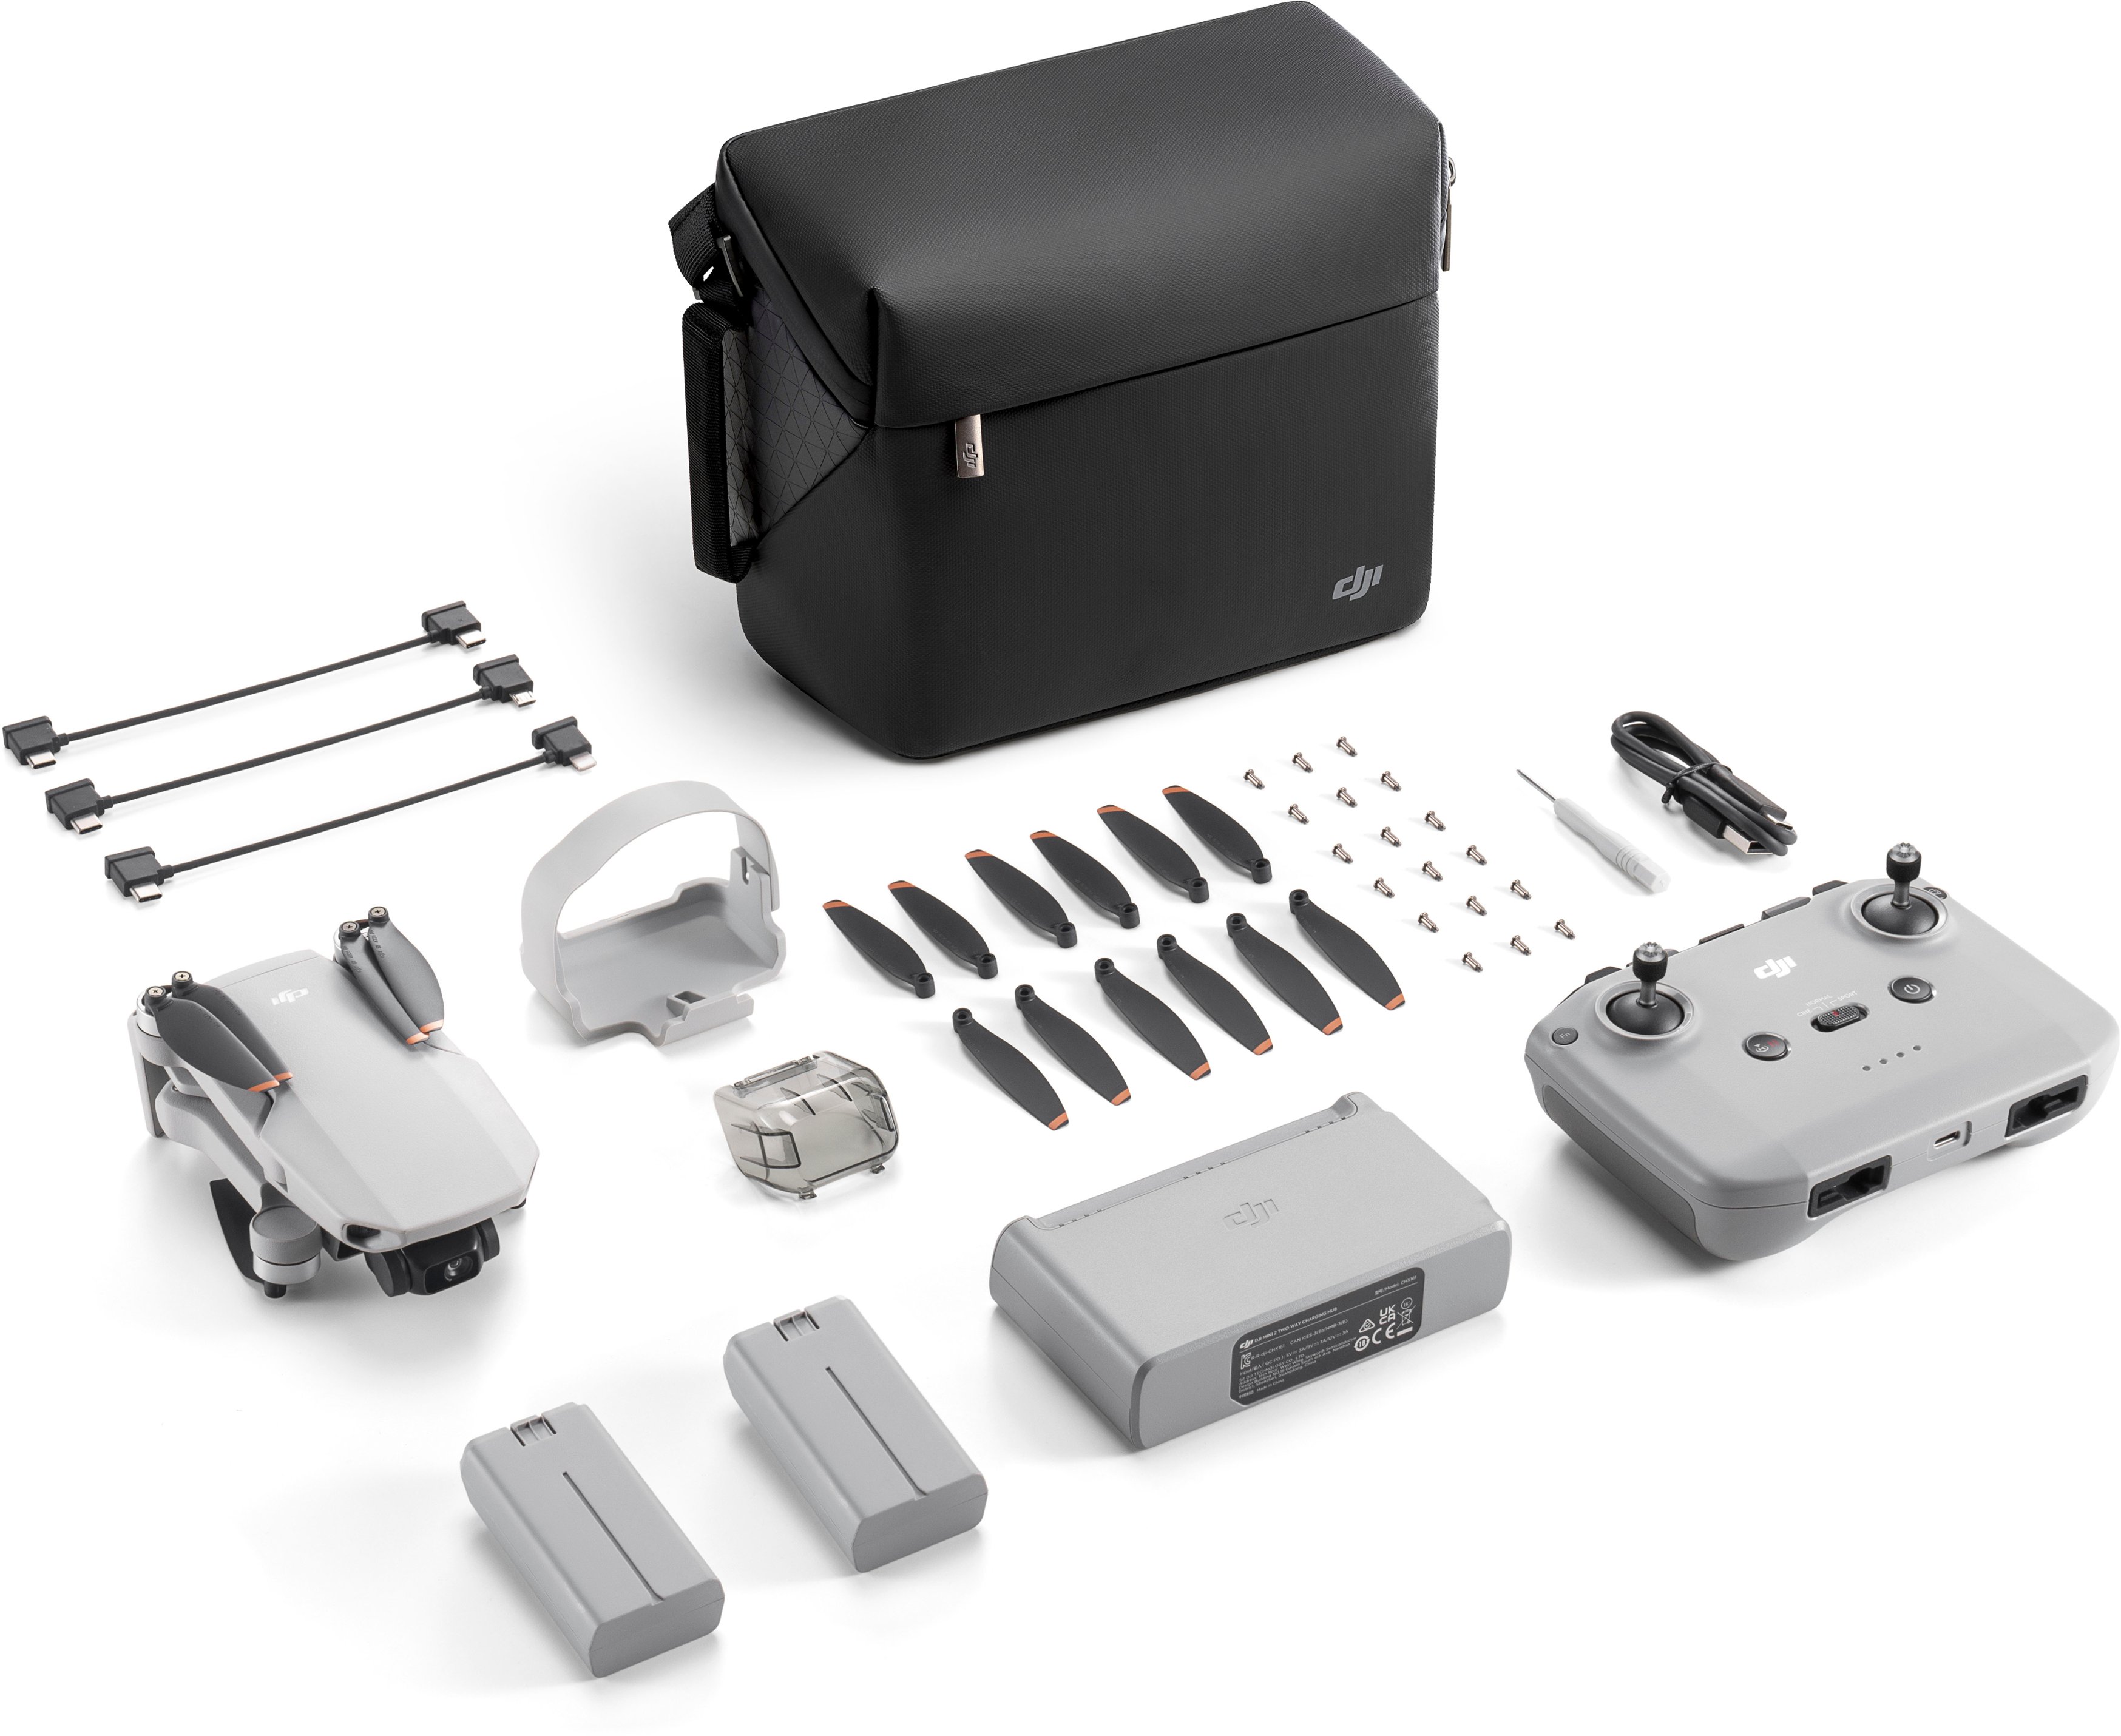 DJI Mini 2 Fly More Combo - Global Instruments Store